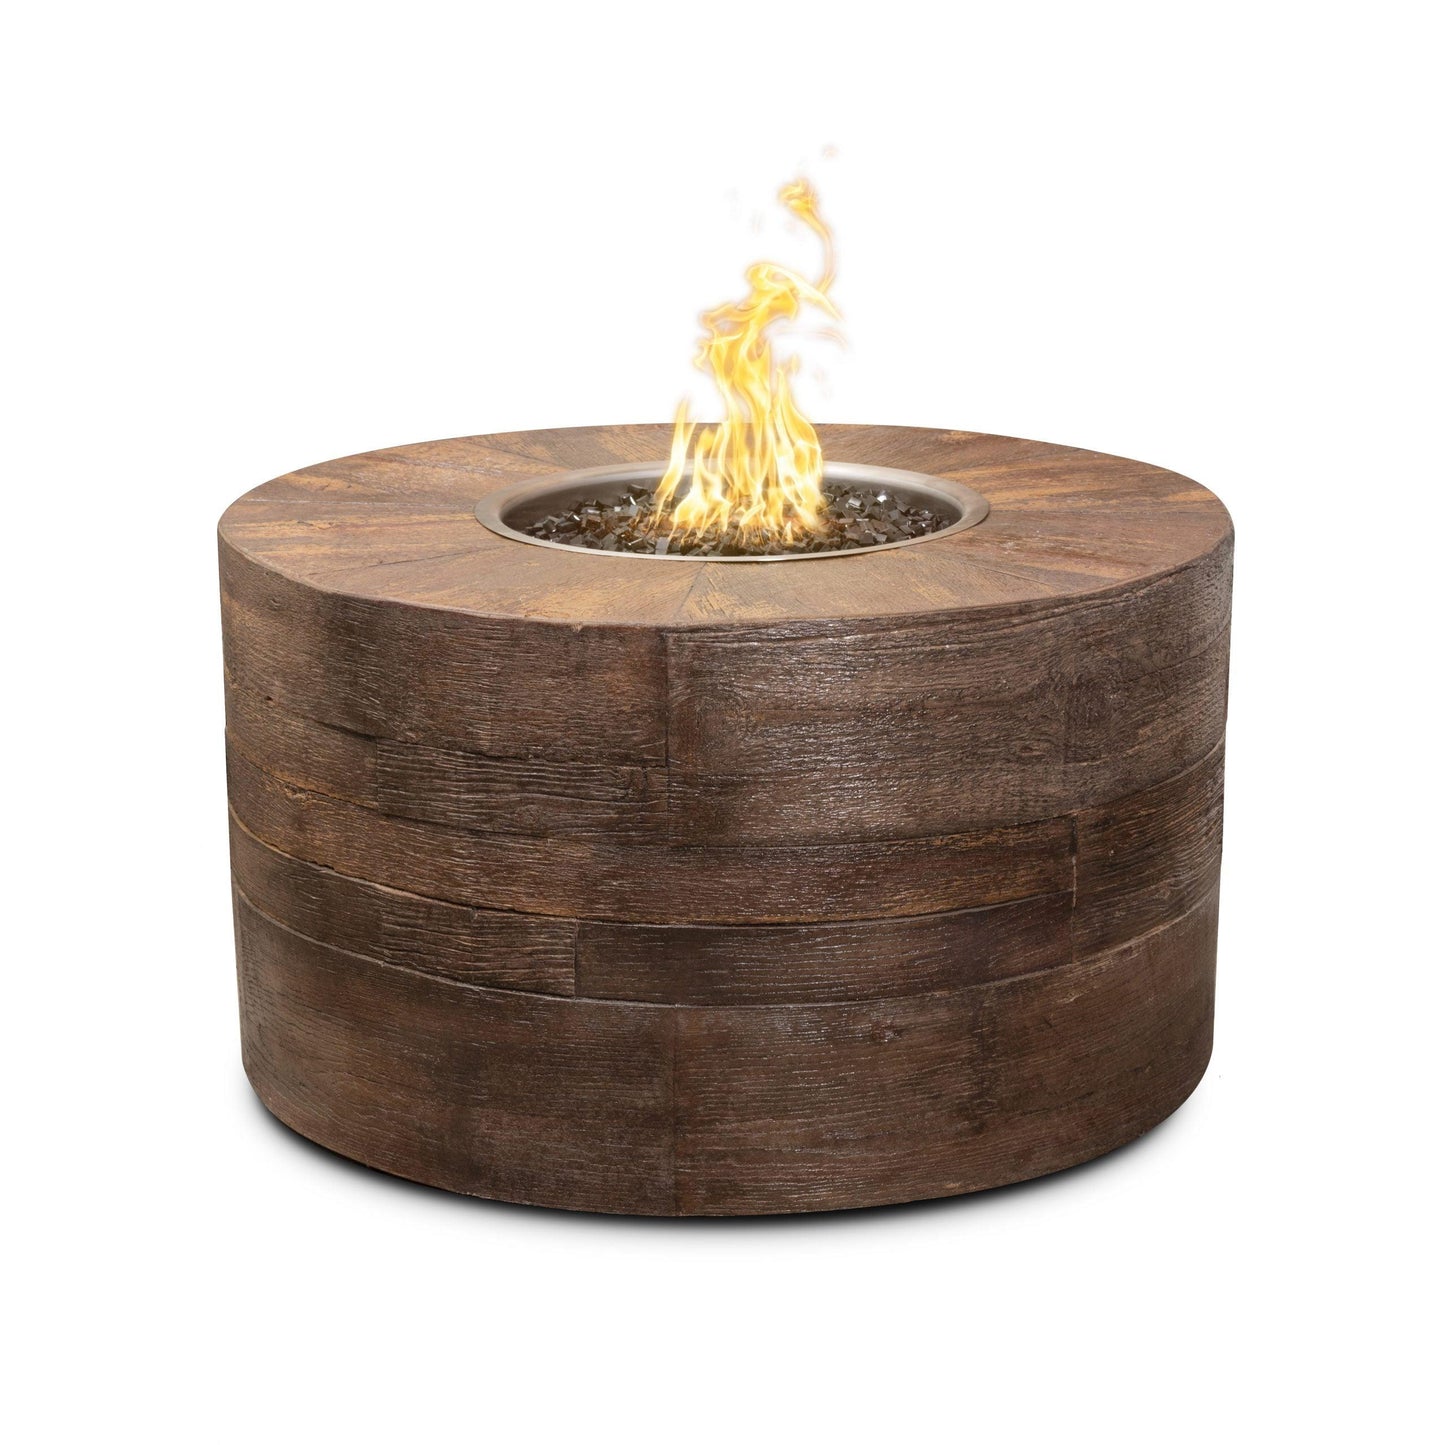 Sequoia Fire Pit scaled